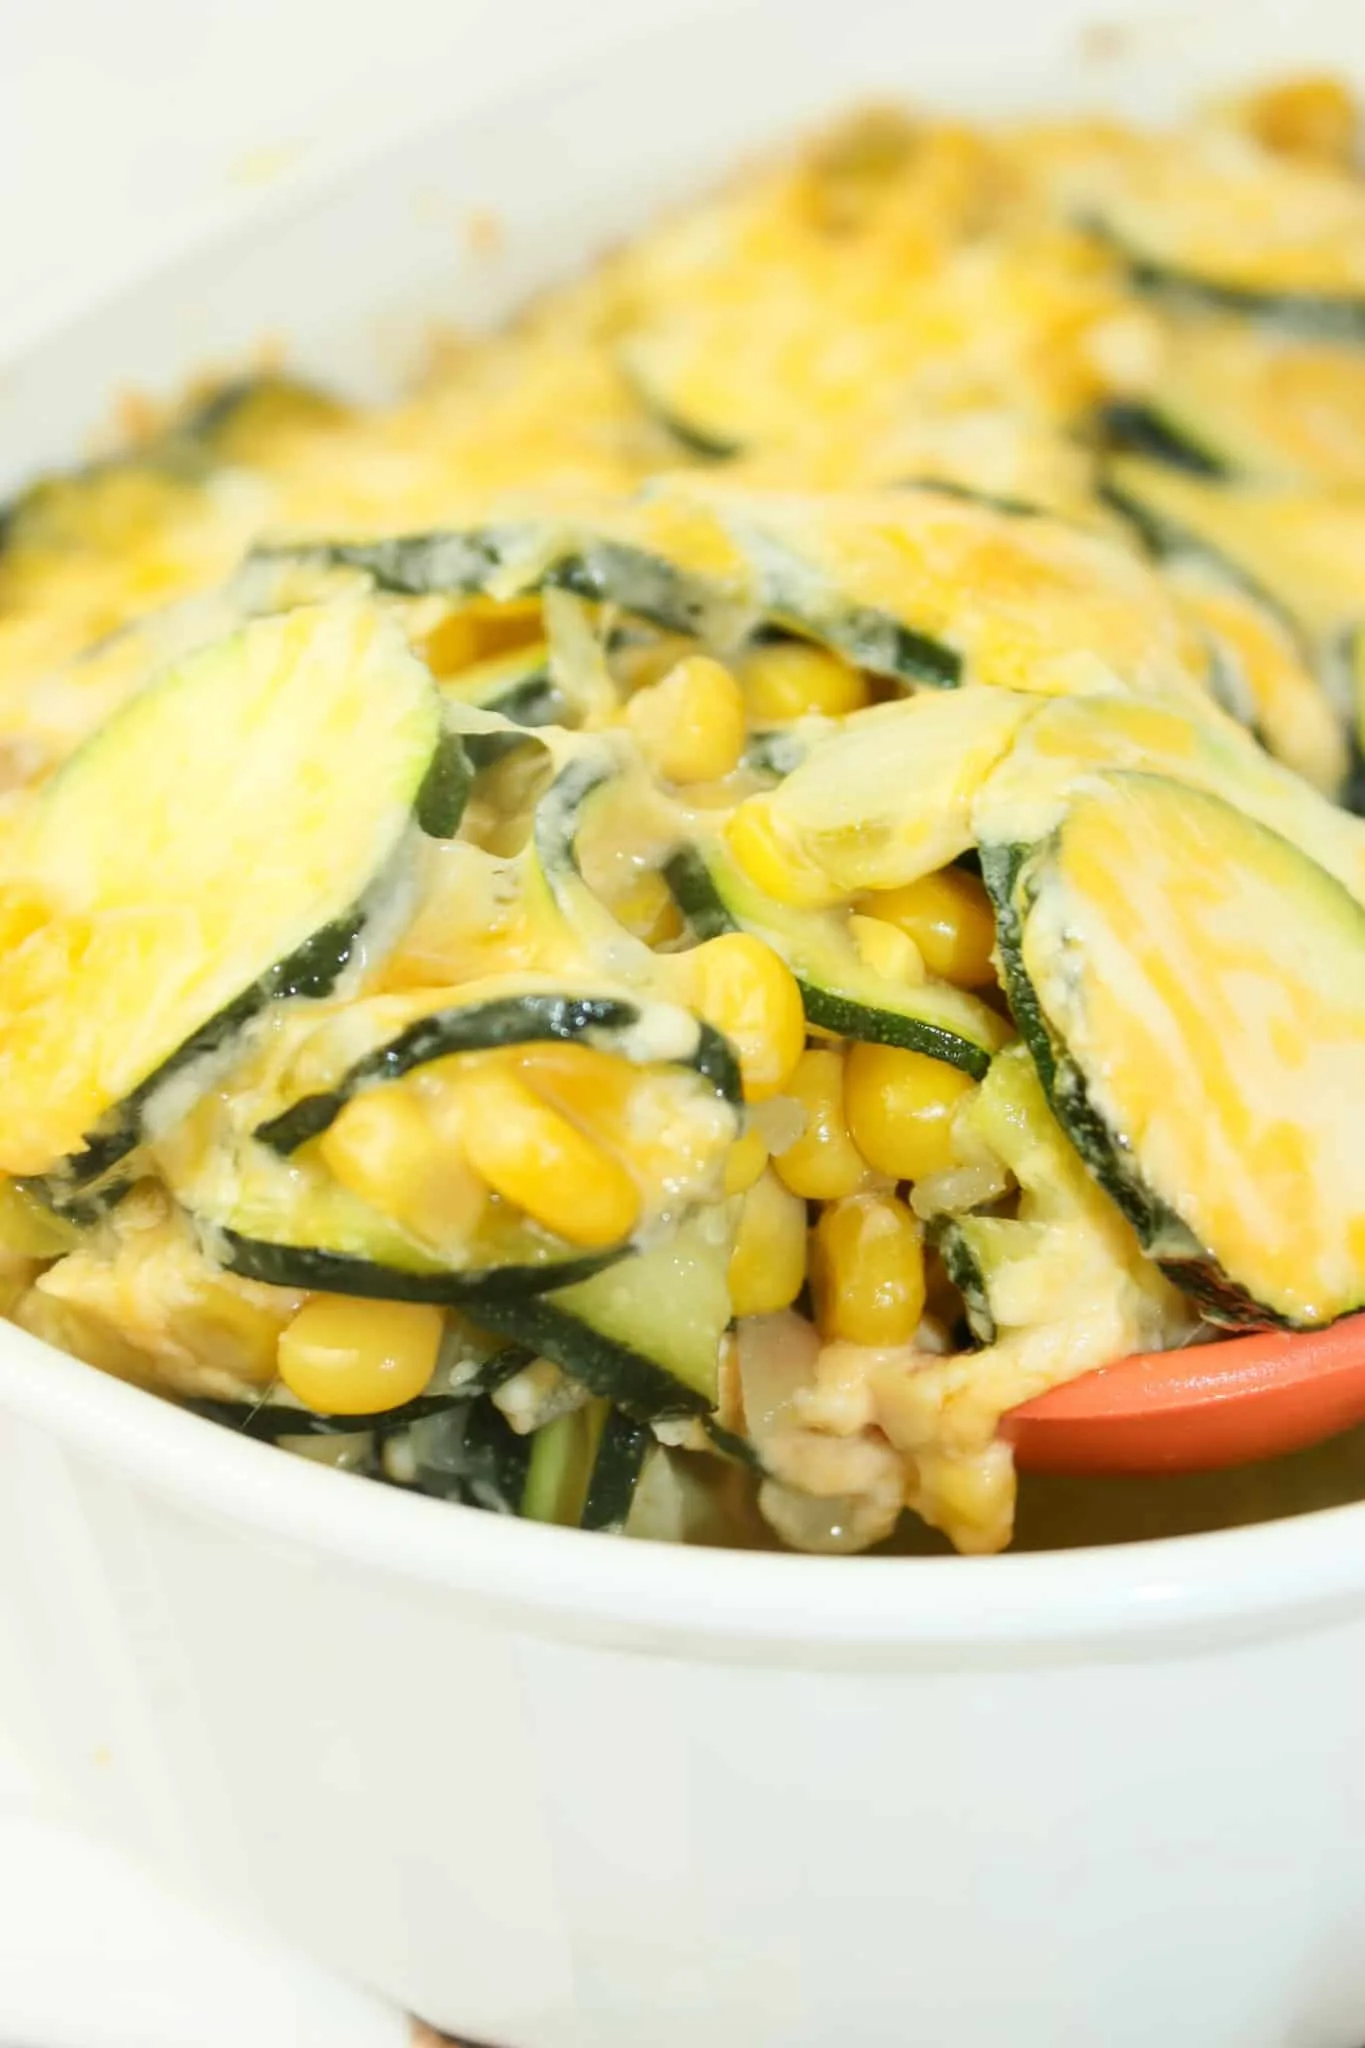 Mexican Squash Casserole is a quick side dish that can easily be whipped up on a busy week night.  This gluten free recipe is loaded with corn and topped with a flavourful cheese blend.